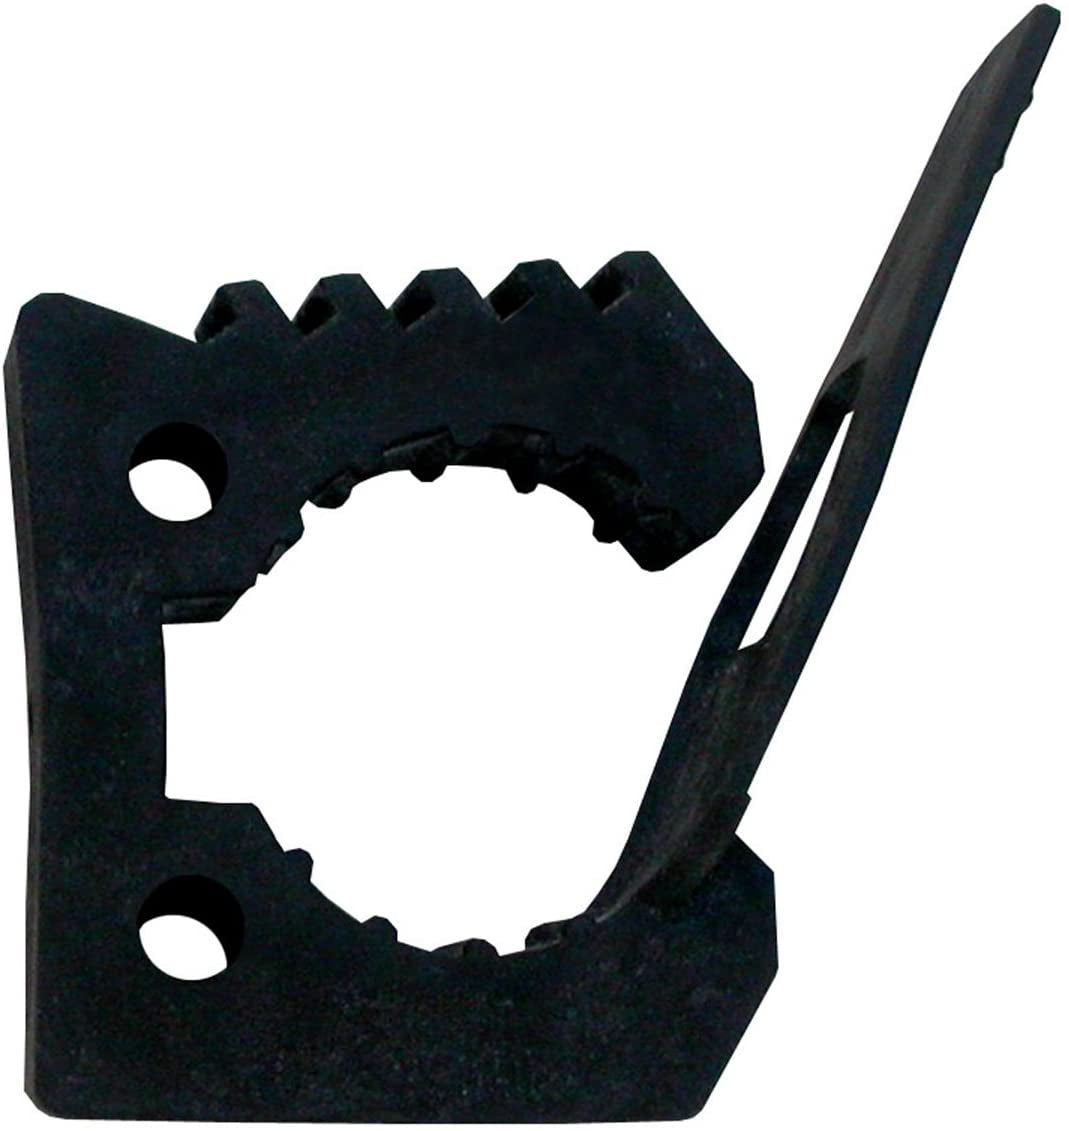 QUICK FIST, END of ROAD Original Quick Fist Clamp for Mounting Tools & Equipment 1" - 2-1/4" Diameter (Pack of 2) - 10010